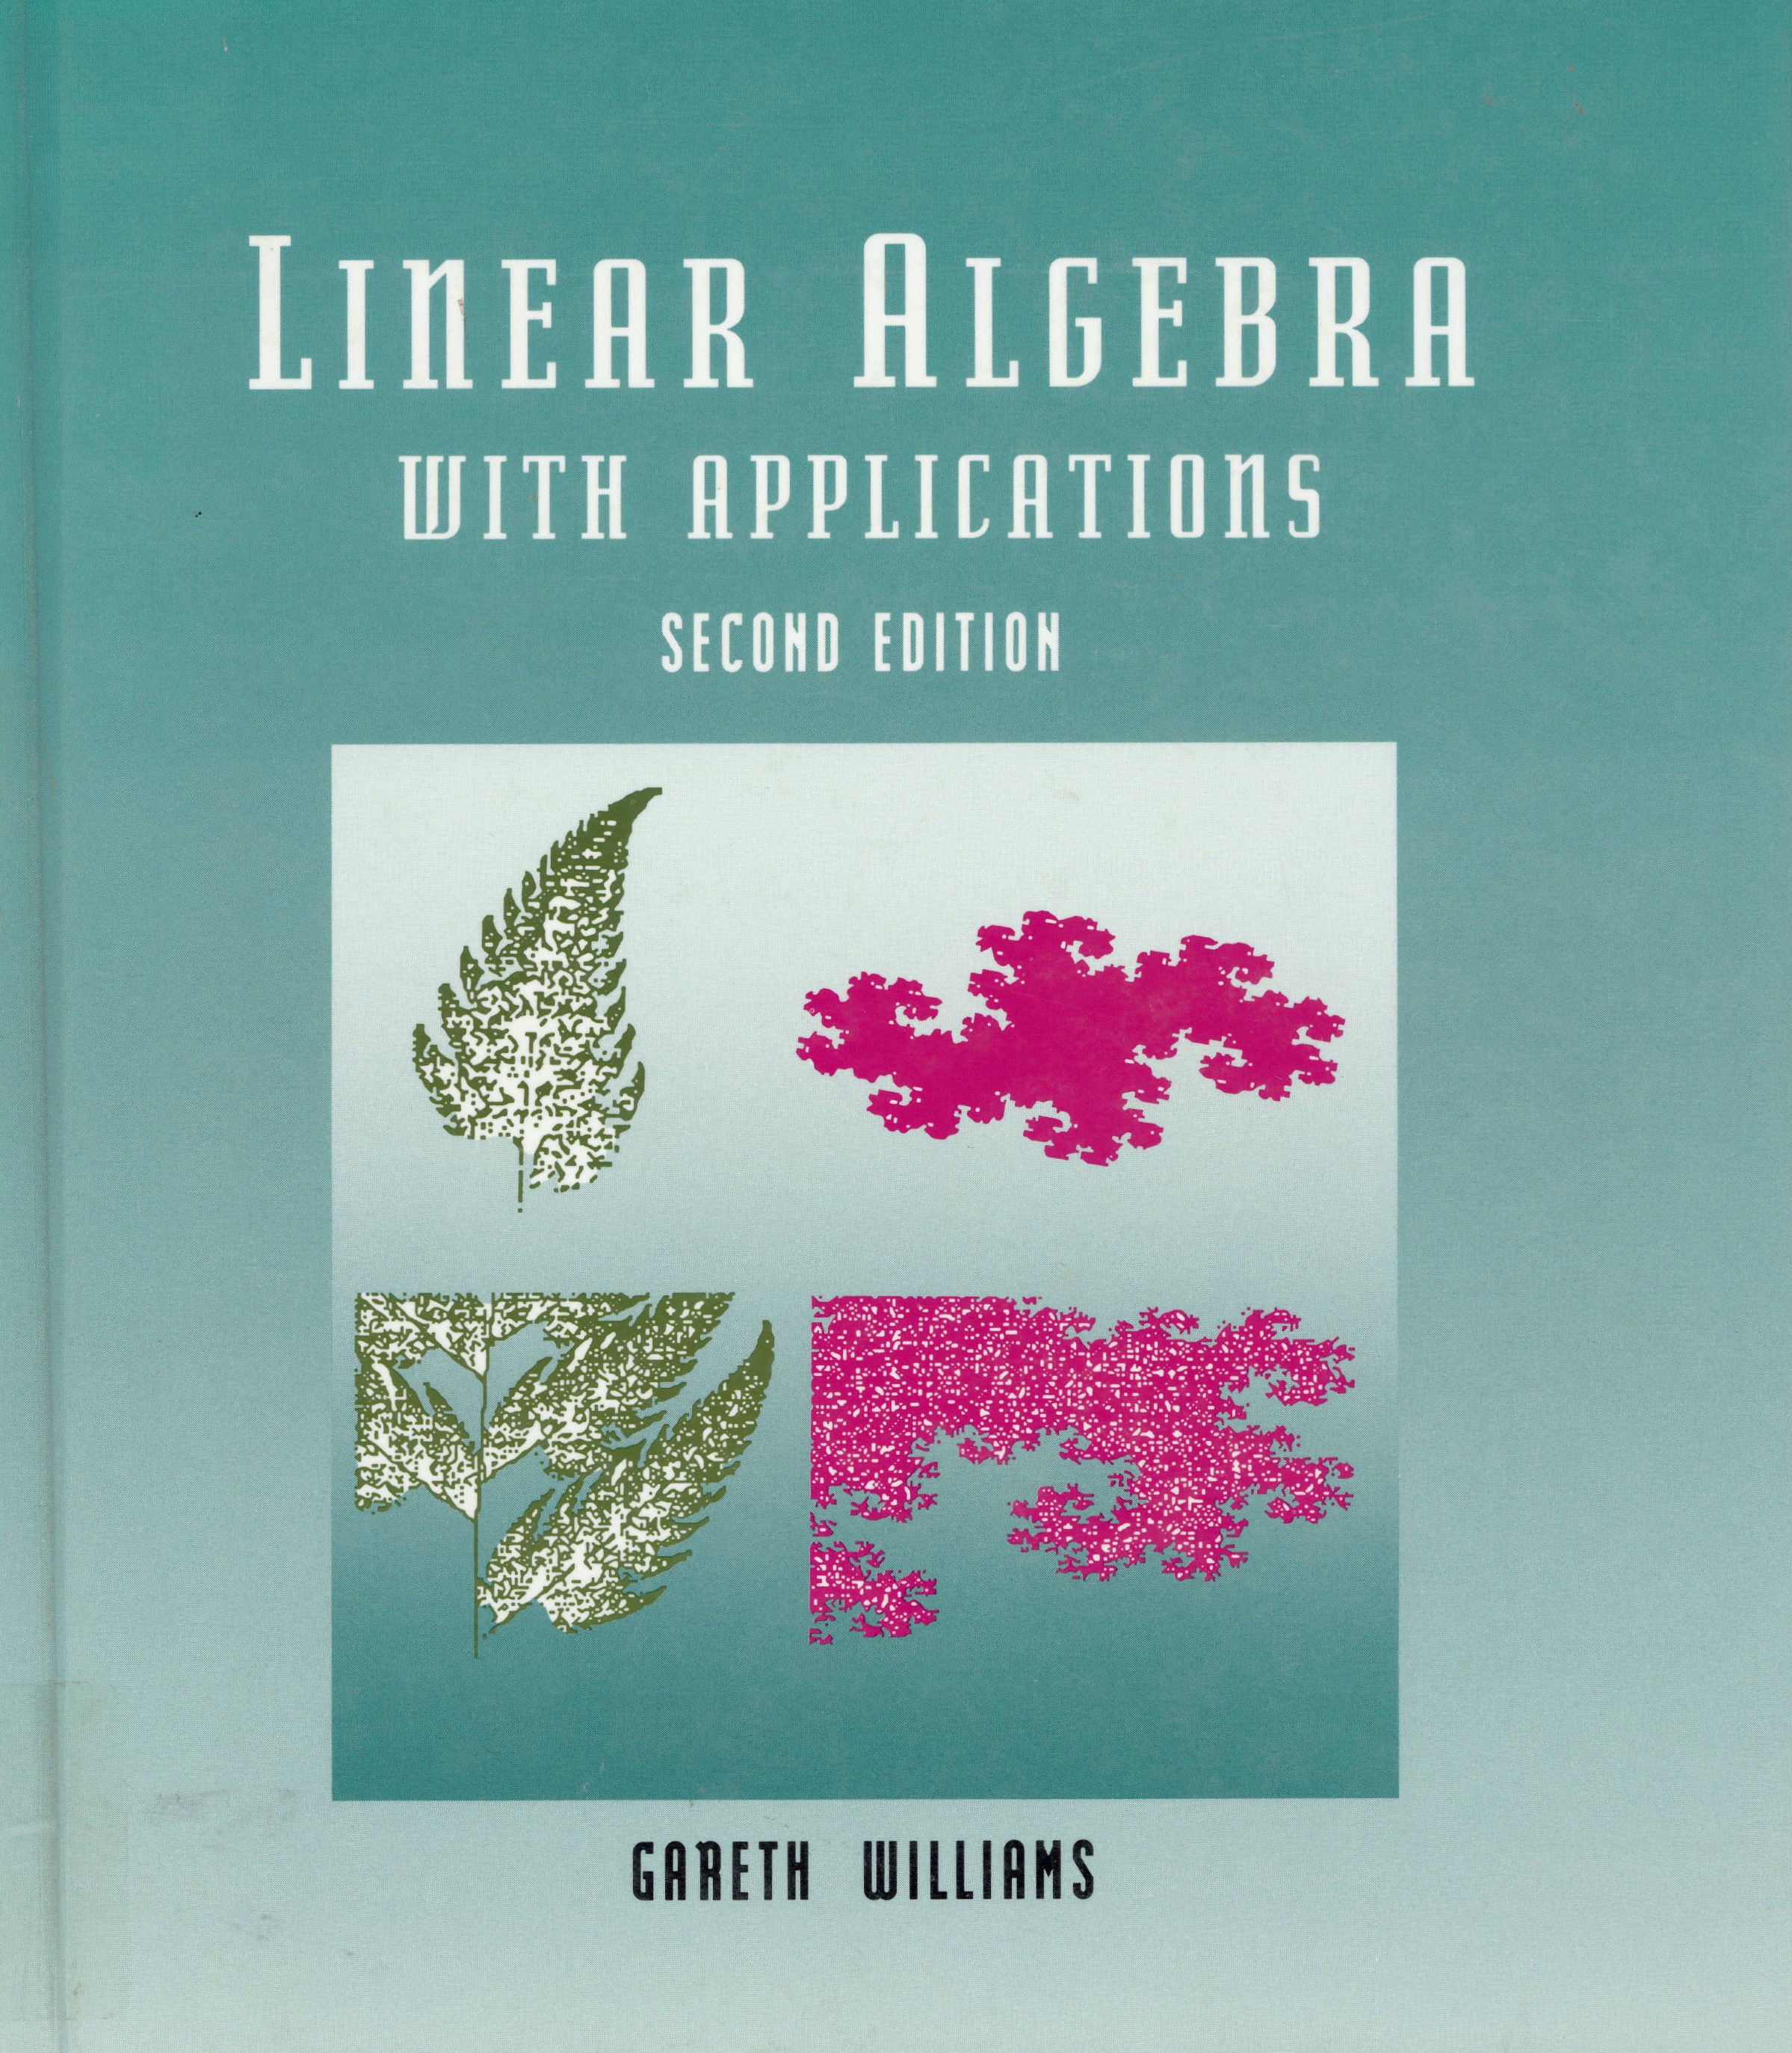 Linear algebra with applications